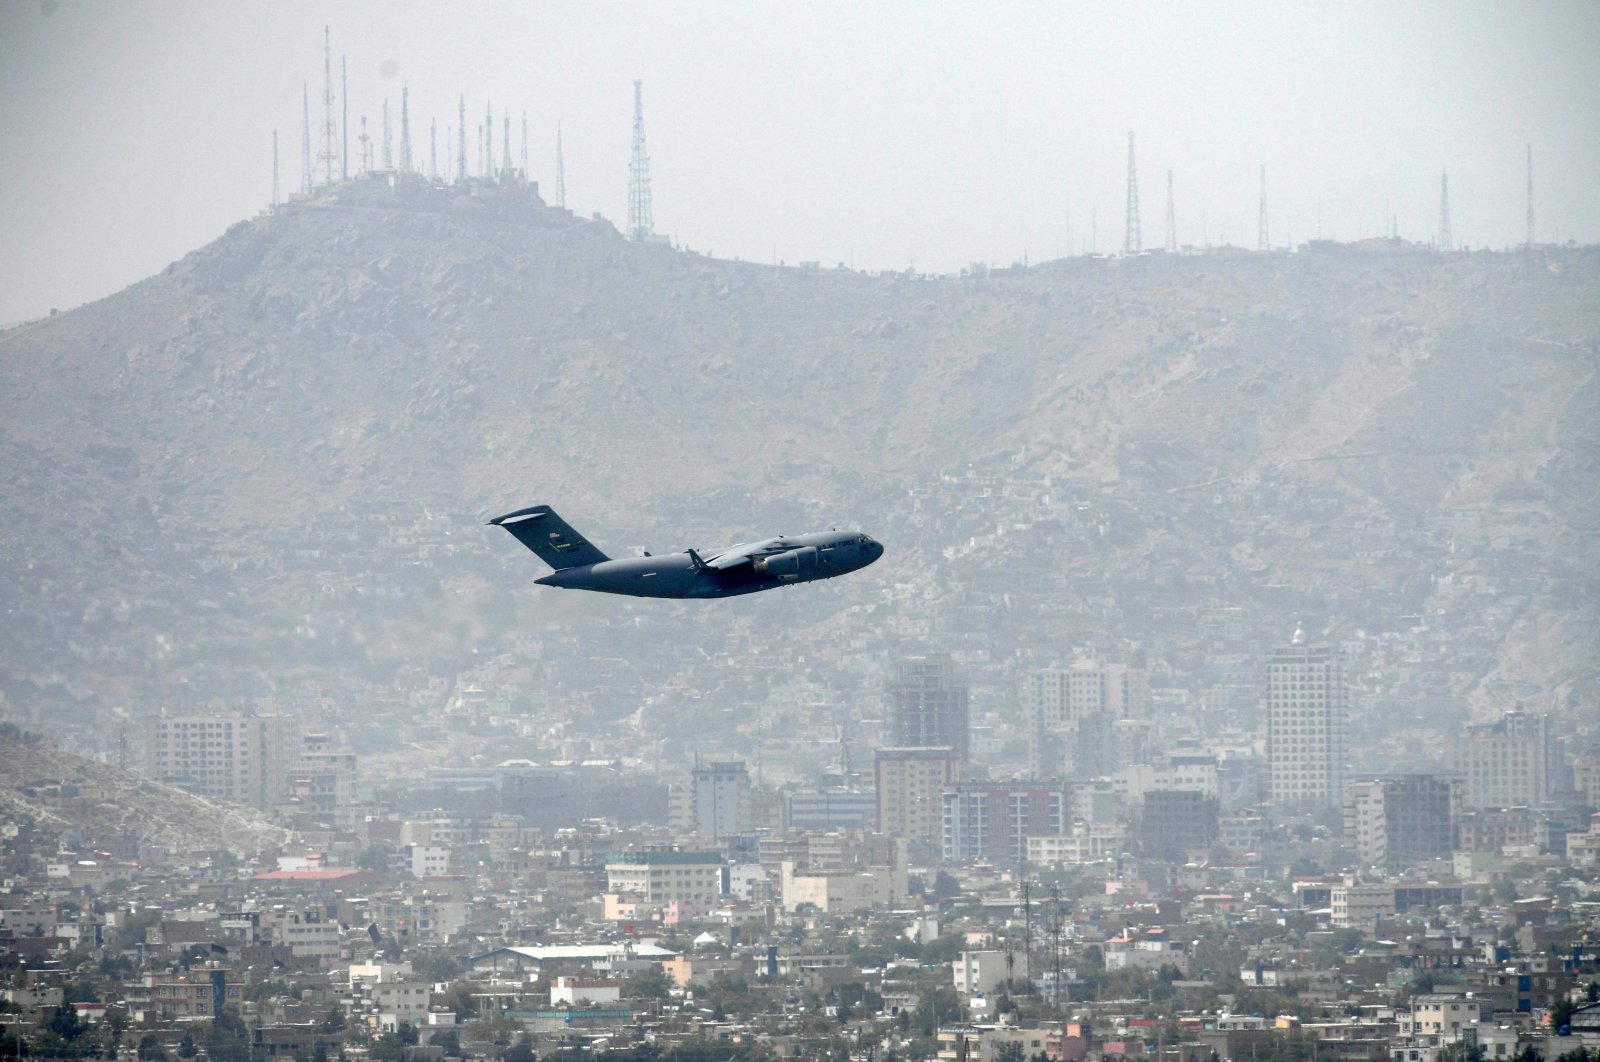 A U.S. Air Force aircraft takes off from the airport in Kabul, Afghanistan, Aug. 30, 2021. (AFP Photo)